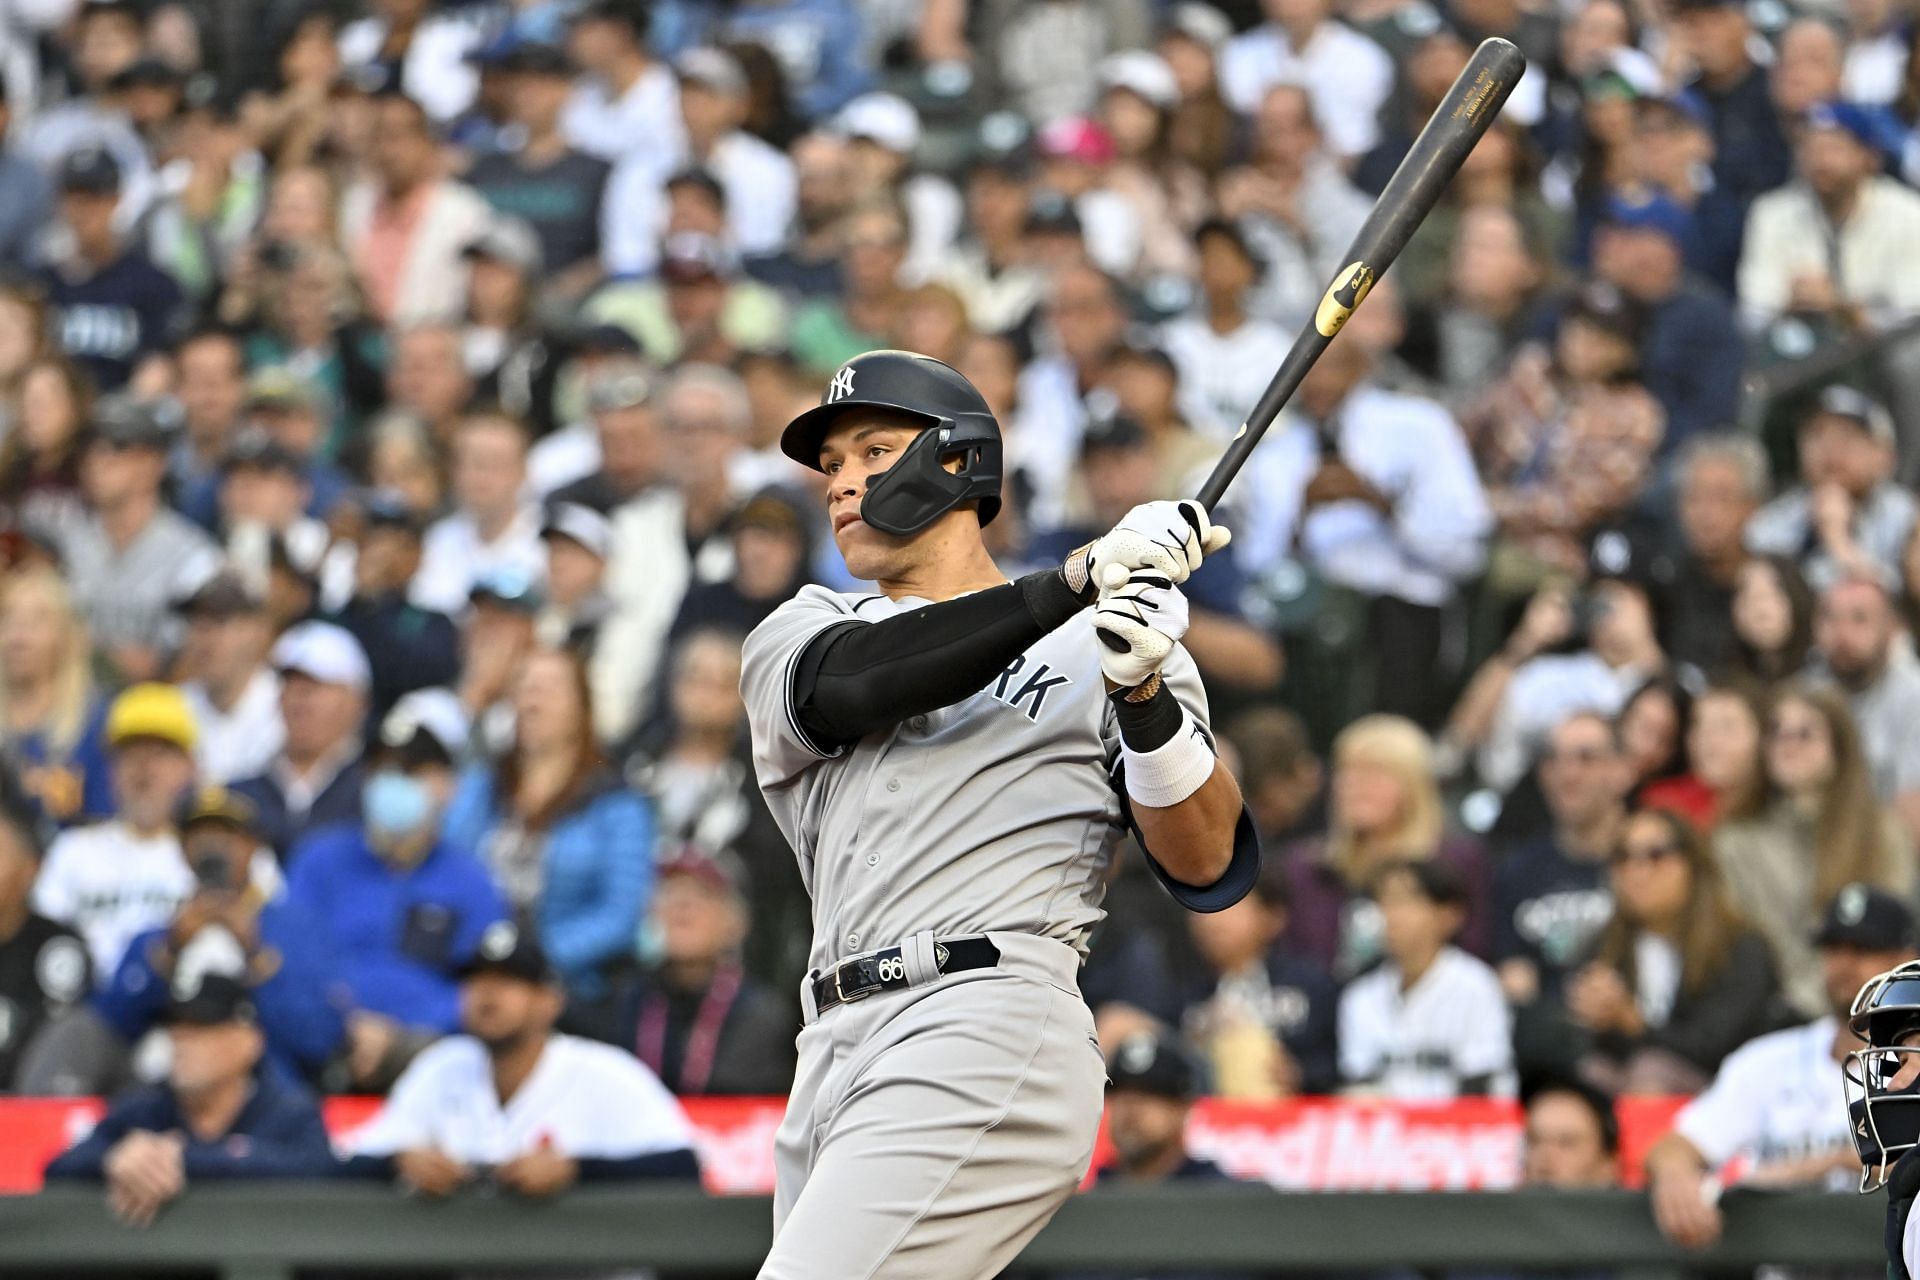 Aaron Judge of the New York Yankees hits a two-run home run against the Seattle Mariners at T-Mobile Park